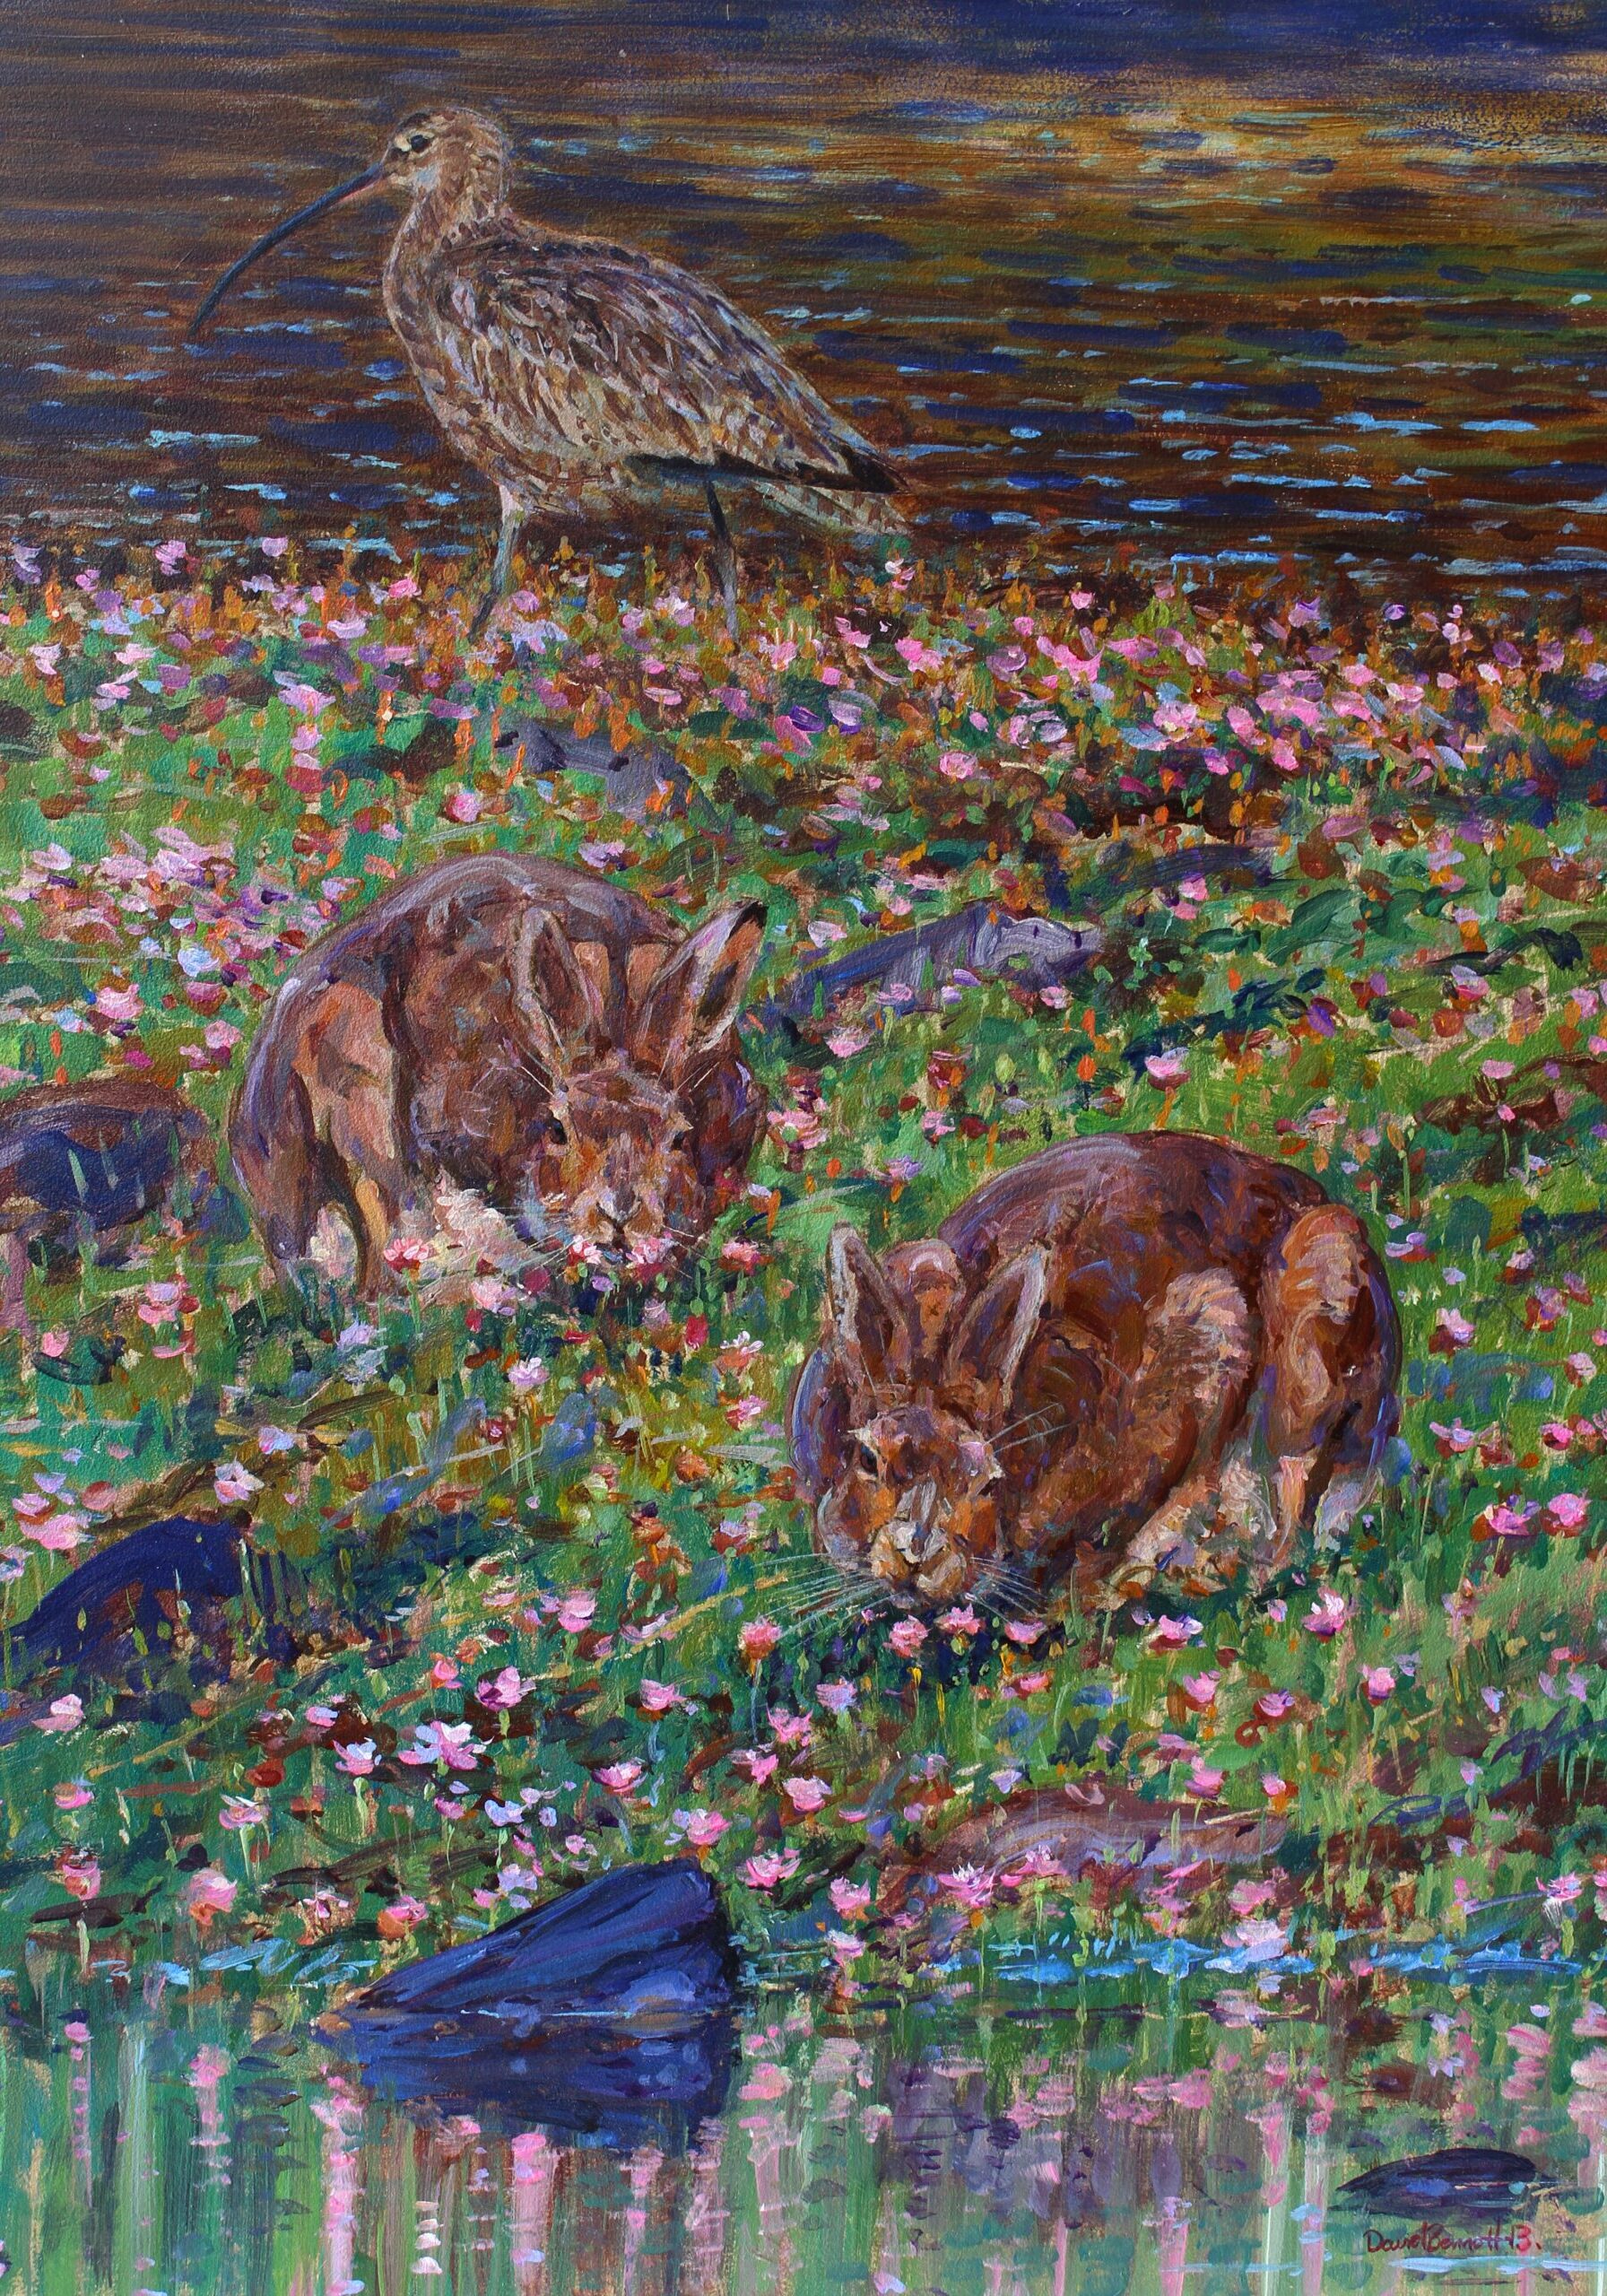 David Bennett - Curlew, Mountain Hares and Thrift - Oil